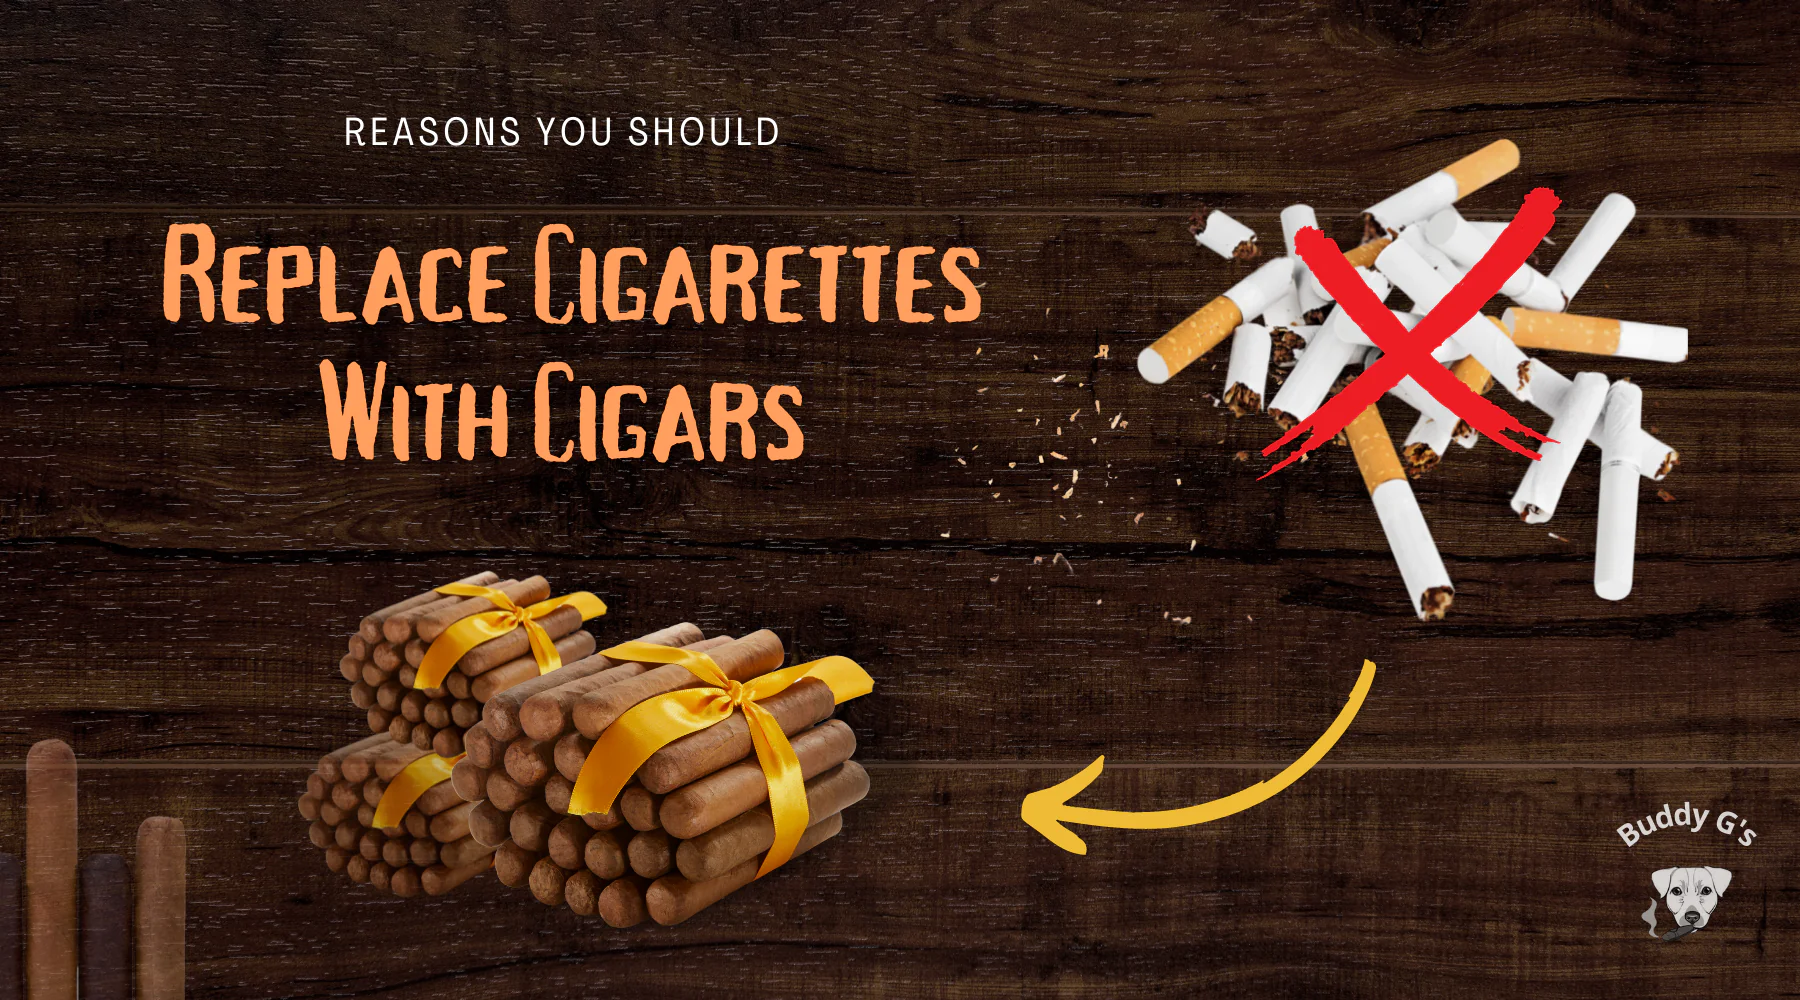 5 Reasons You Should Replace Cigarettes With Cigars